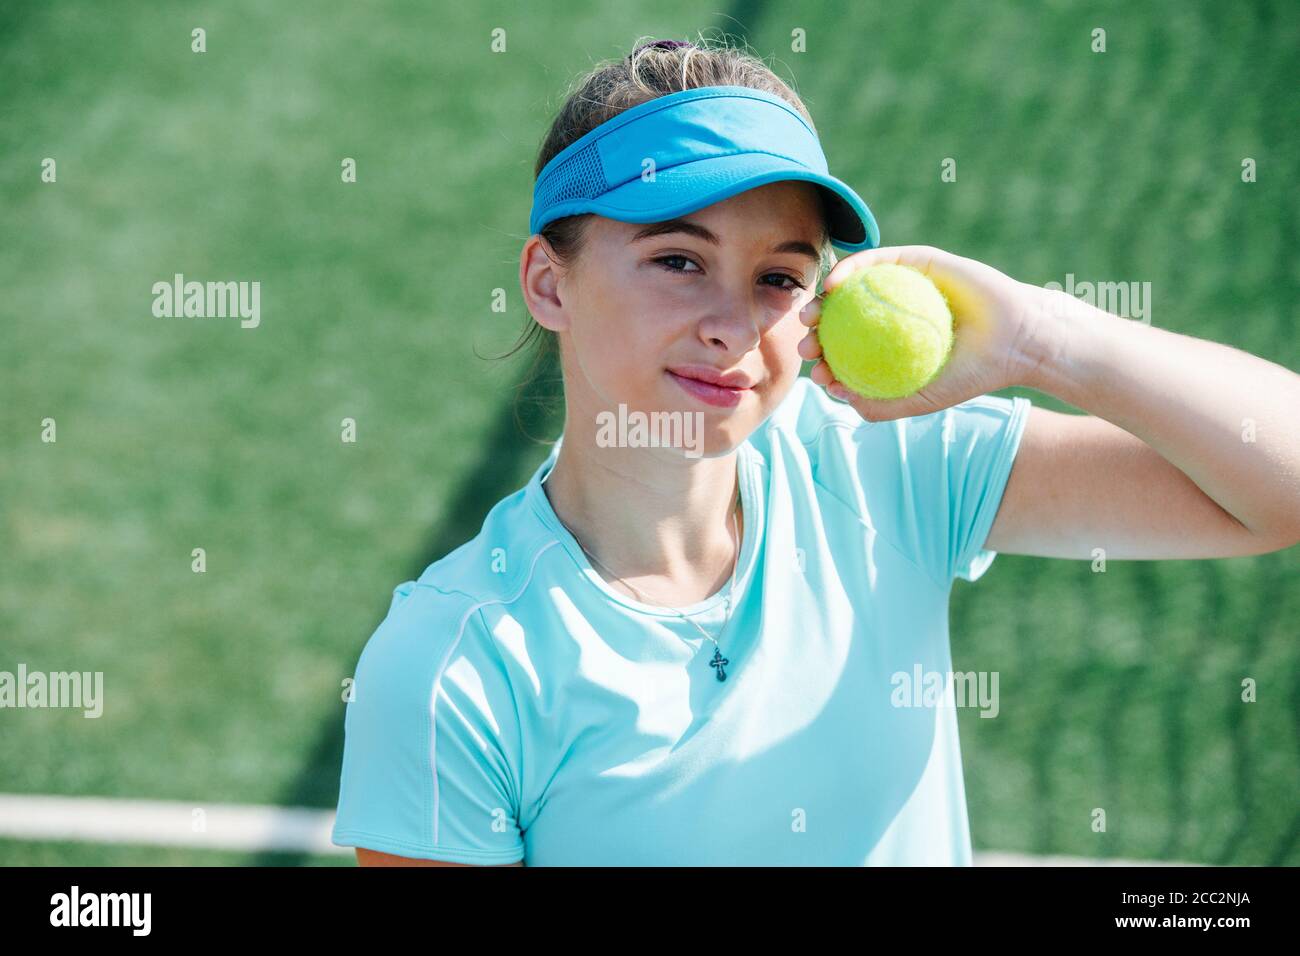 Sixteen year old girl posing with ball in her hand on a tennis court Stock Photo